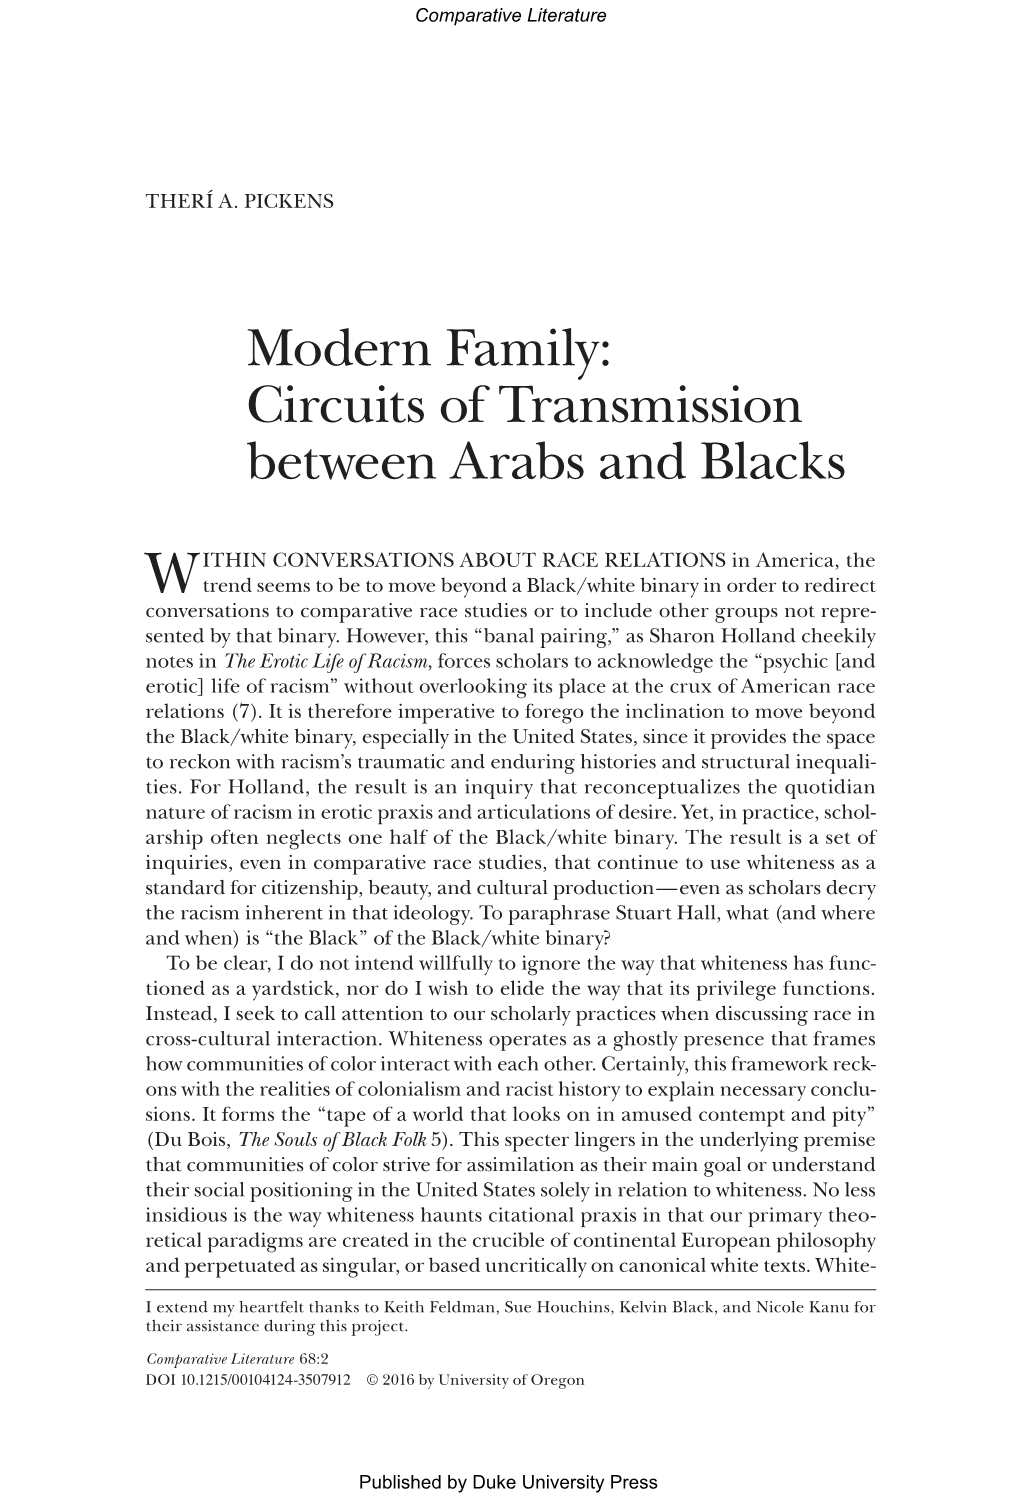 Modern Family: Circuits of Transmission Between Arabs and Blacks